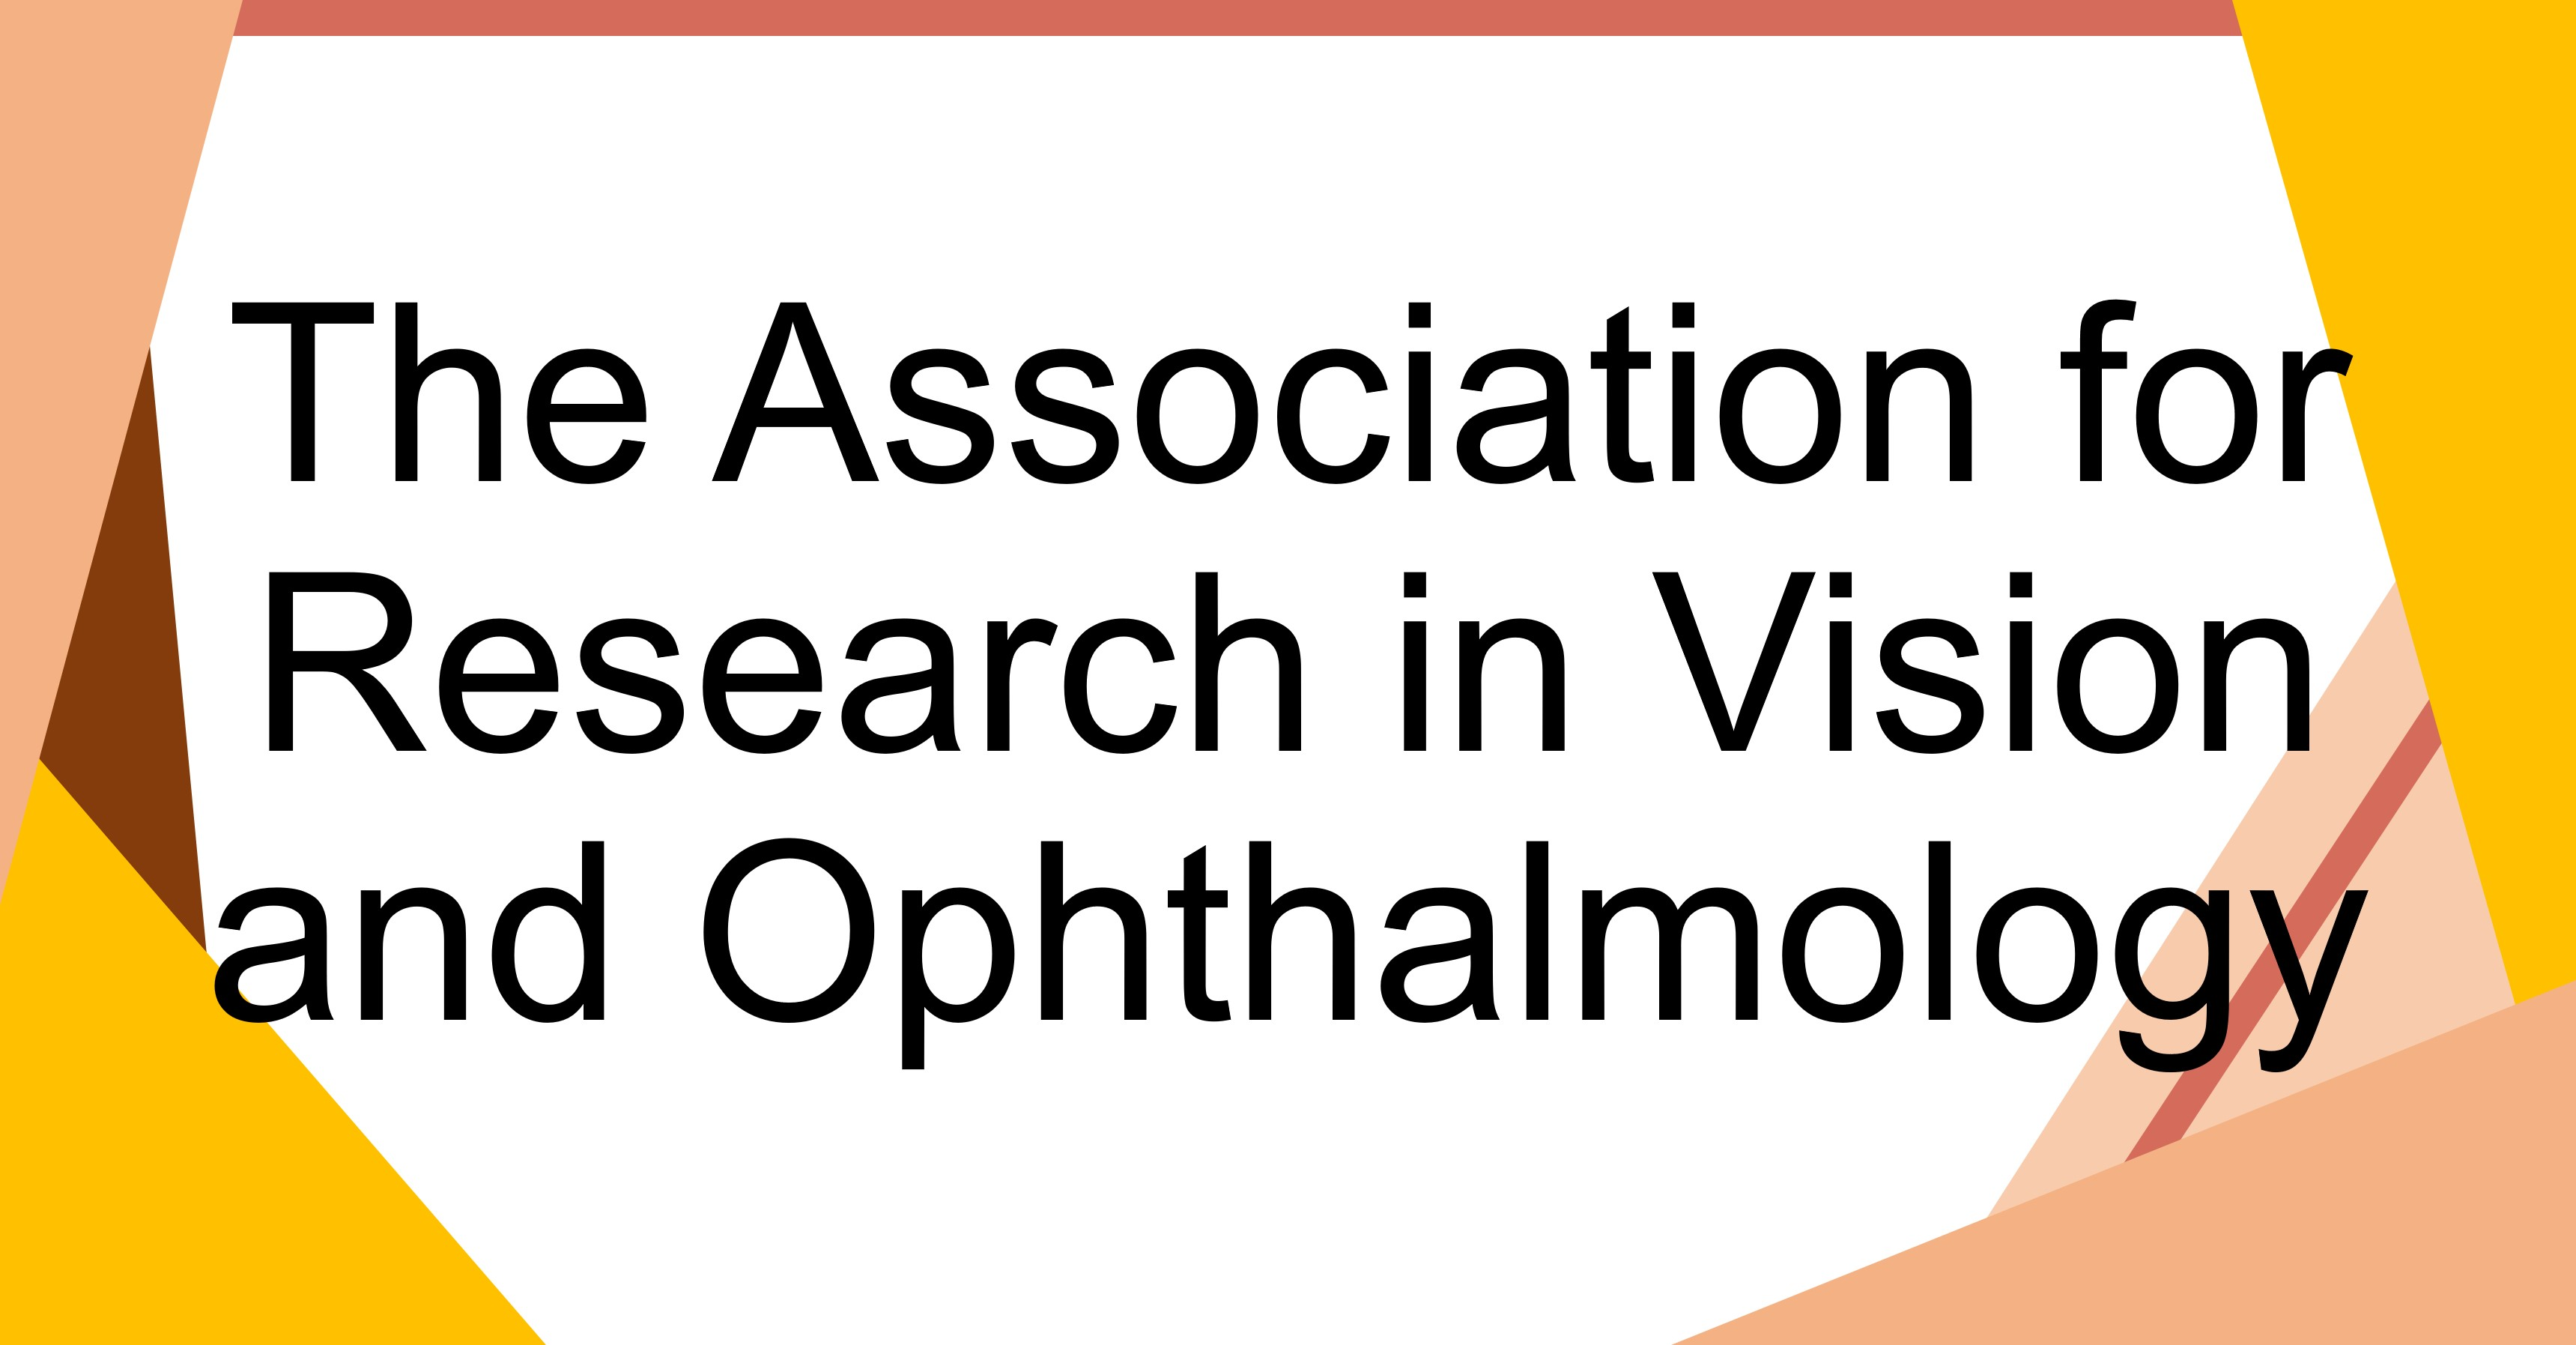 The Association for Research in Vision and Ophthalmology